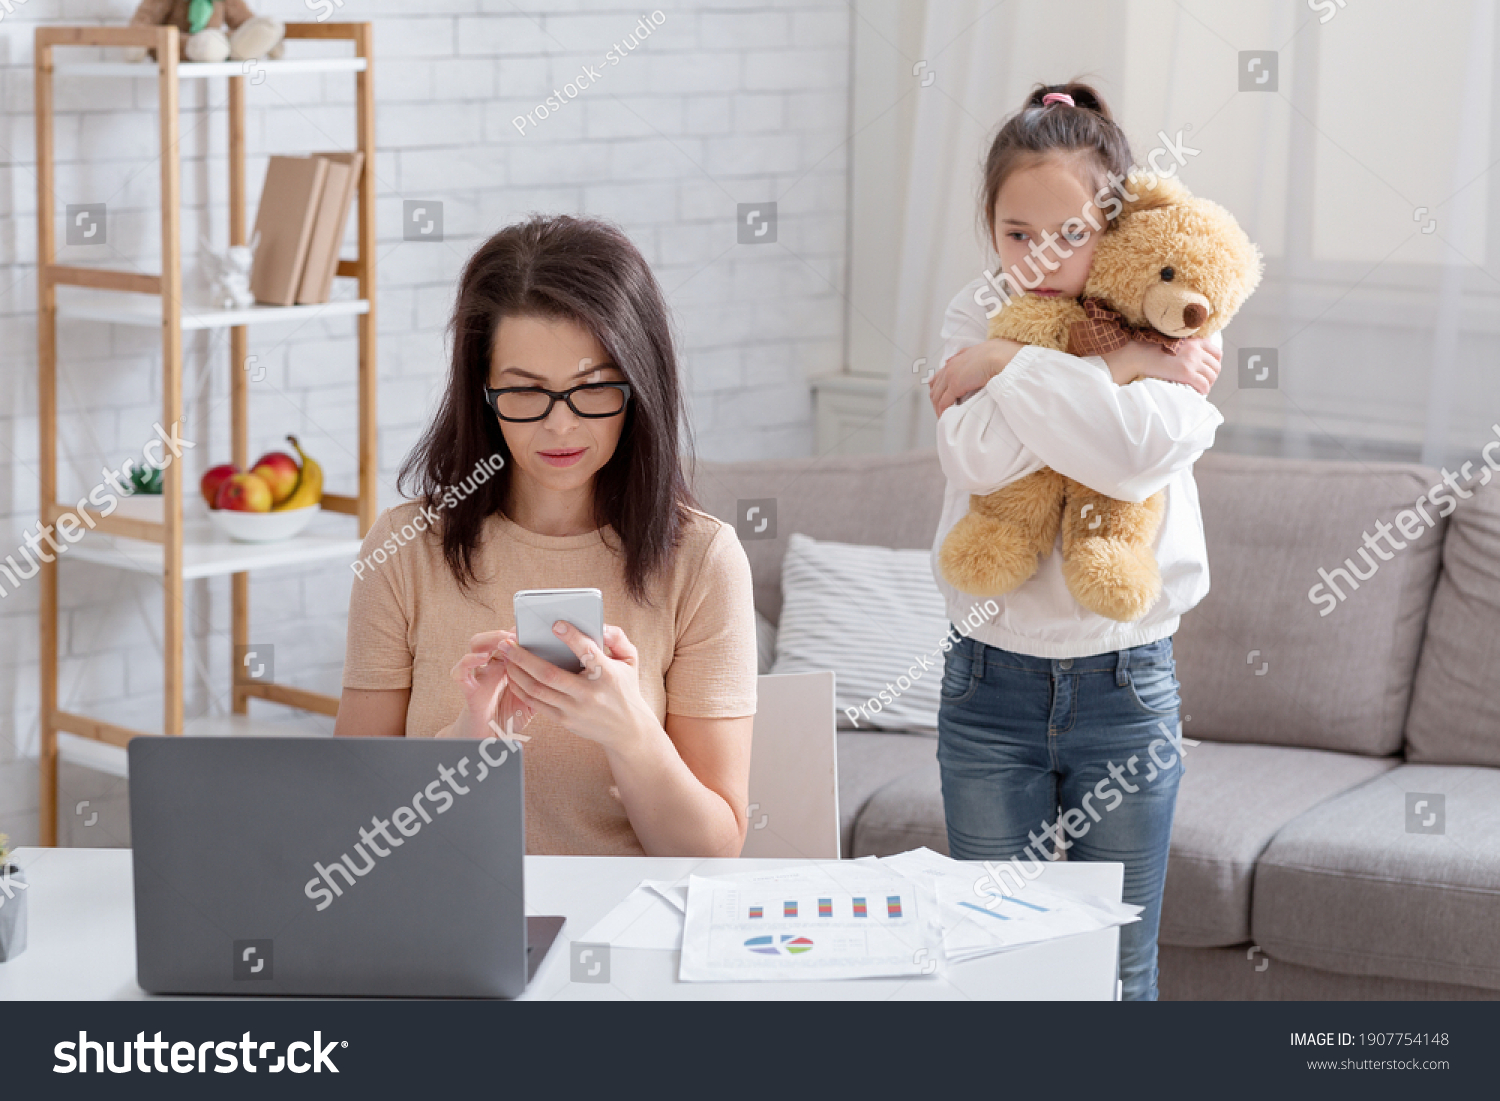 Lonely teen girl hugging teddy bear while her busy mom working online from home, not paying attention to child. Depressed kid feeling neglected, missing her parent. Covid-19 quarantine family problems #1907754148